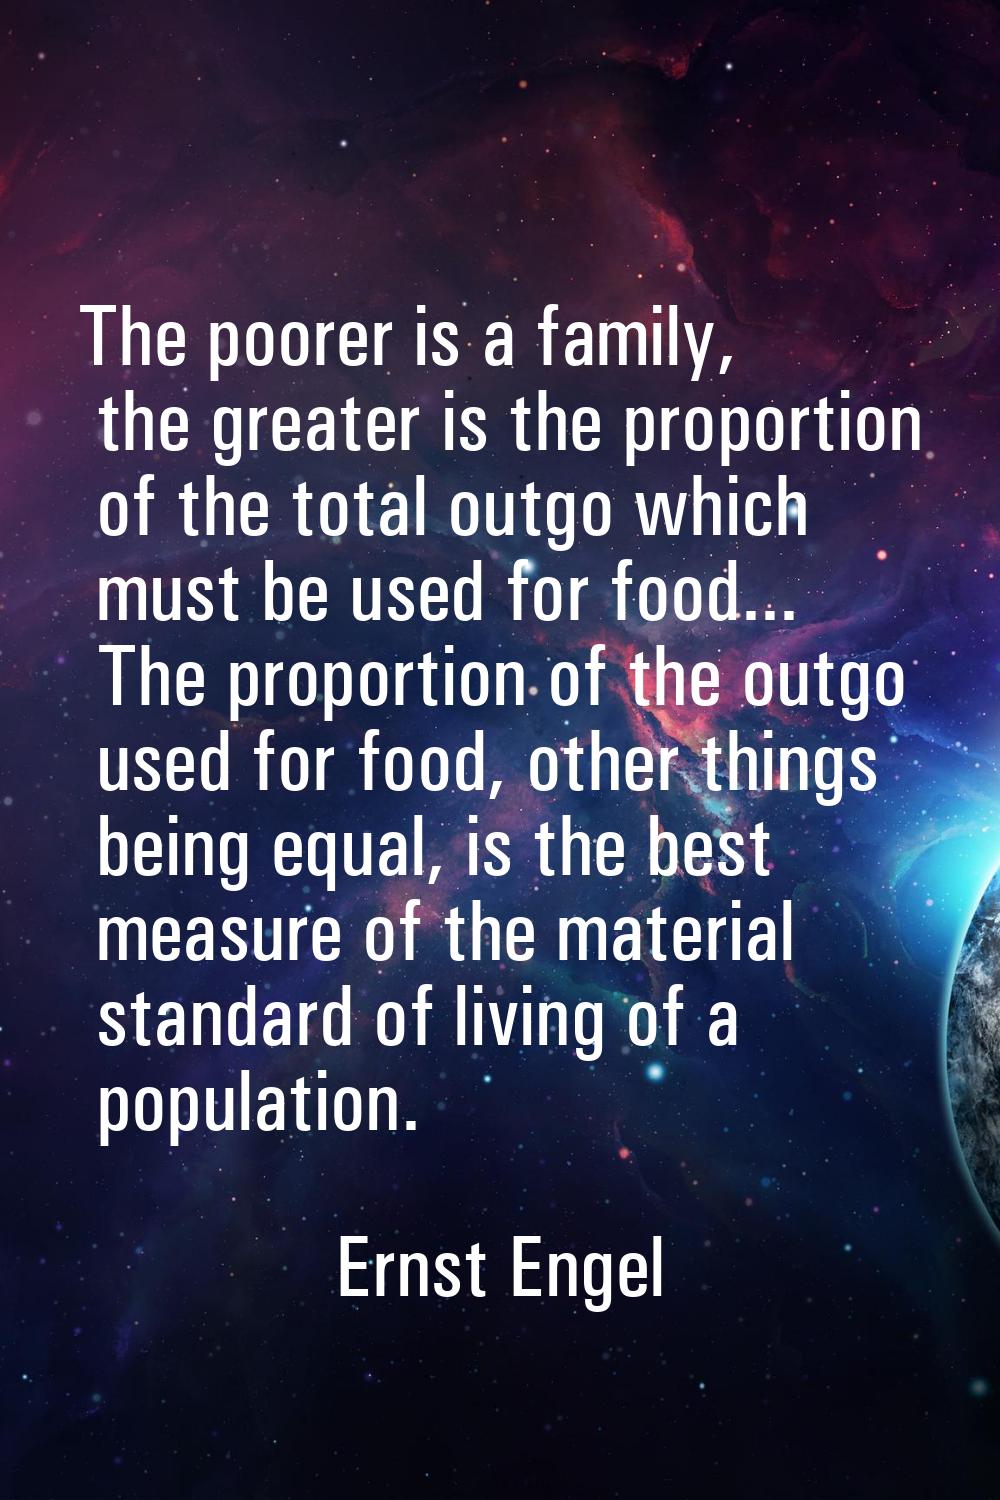 The poorer is a family, the greater is the proportion of the total outgo which must be used for foo